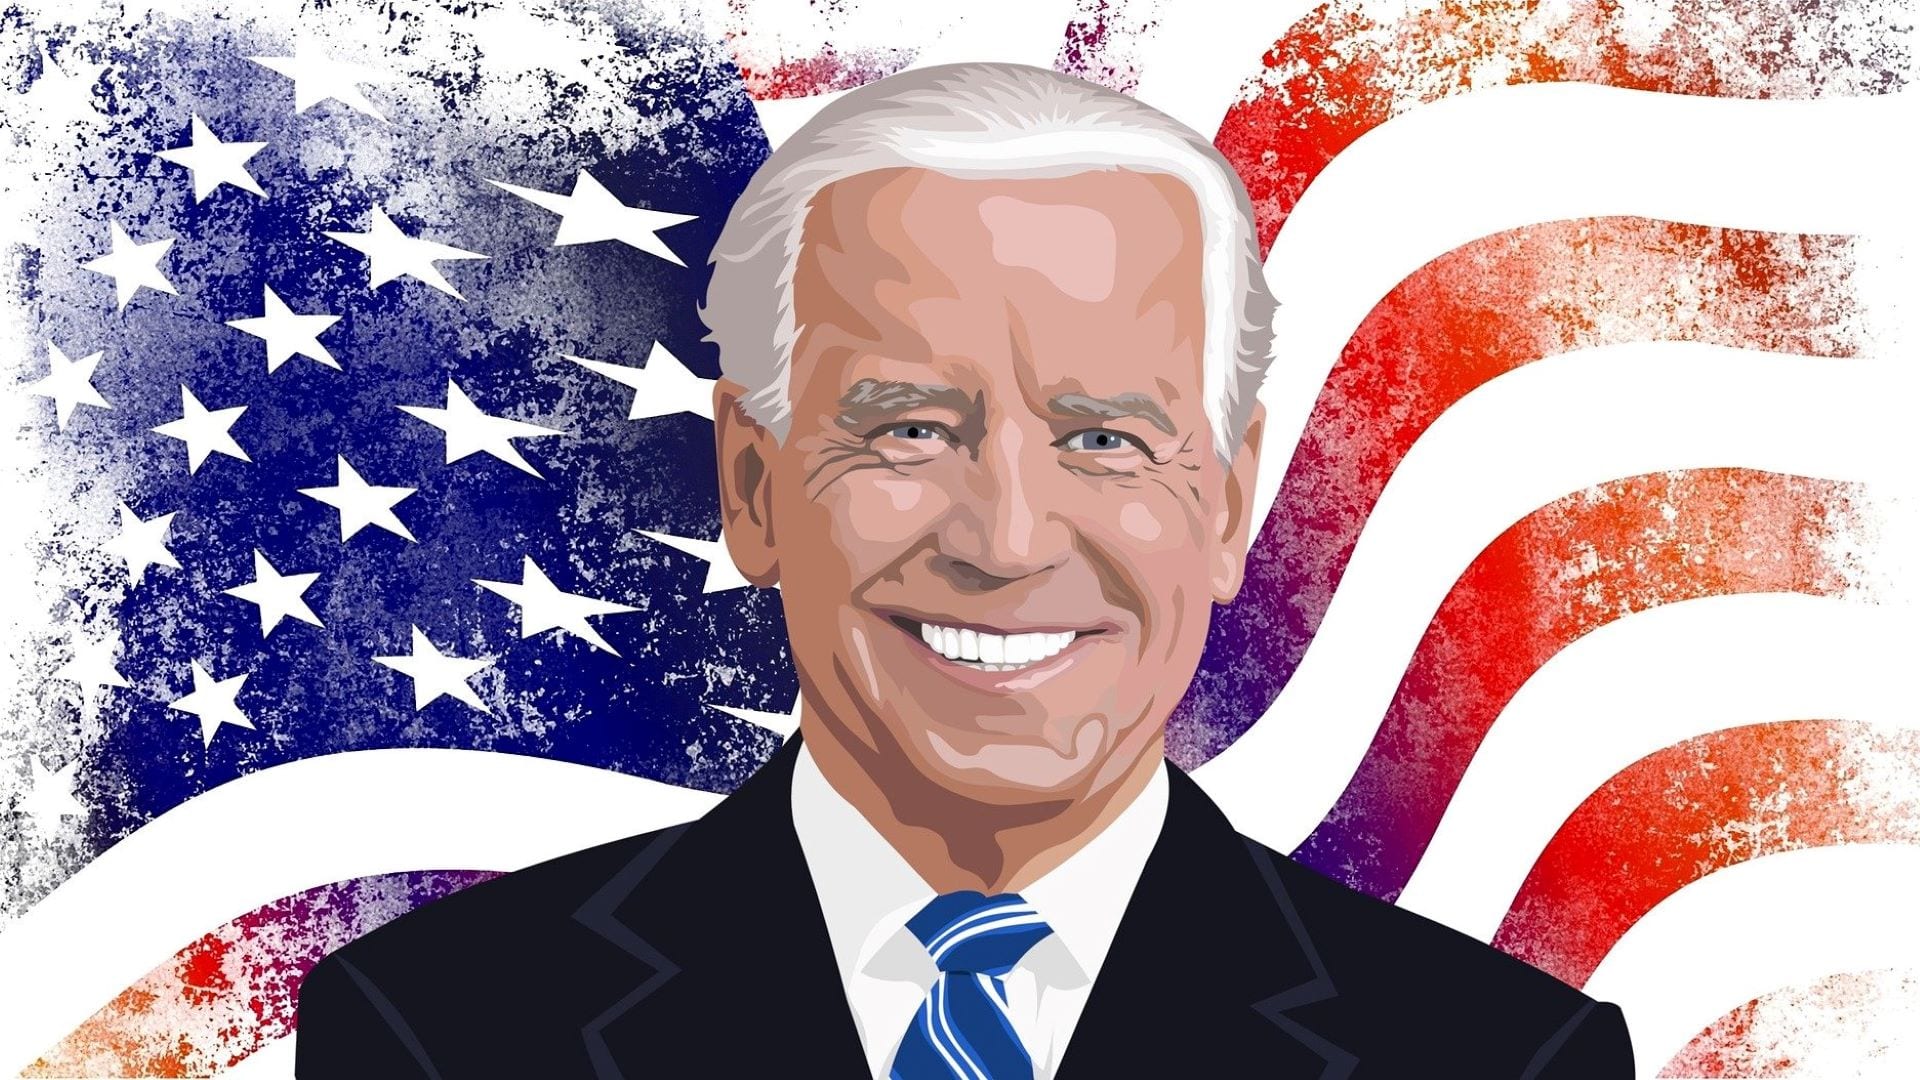 What does a Biden presidency mean for liberty? Let's consider some of his policy priorities, such as COVID-19, climate change, foreign policy and immigration reform